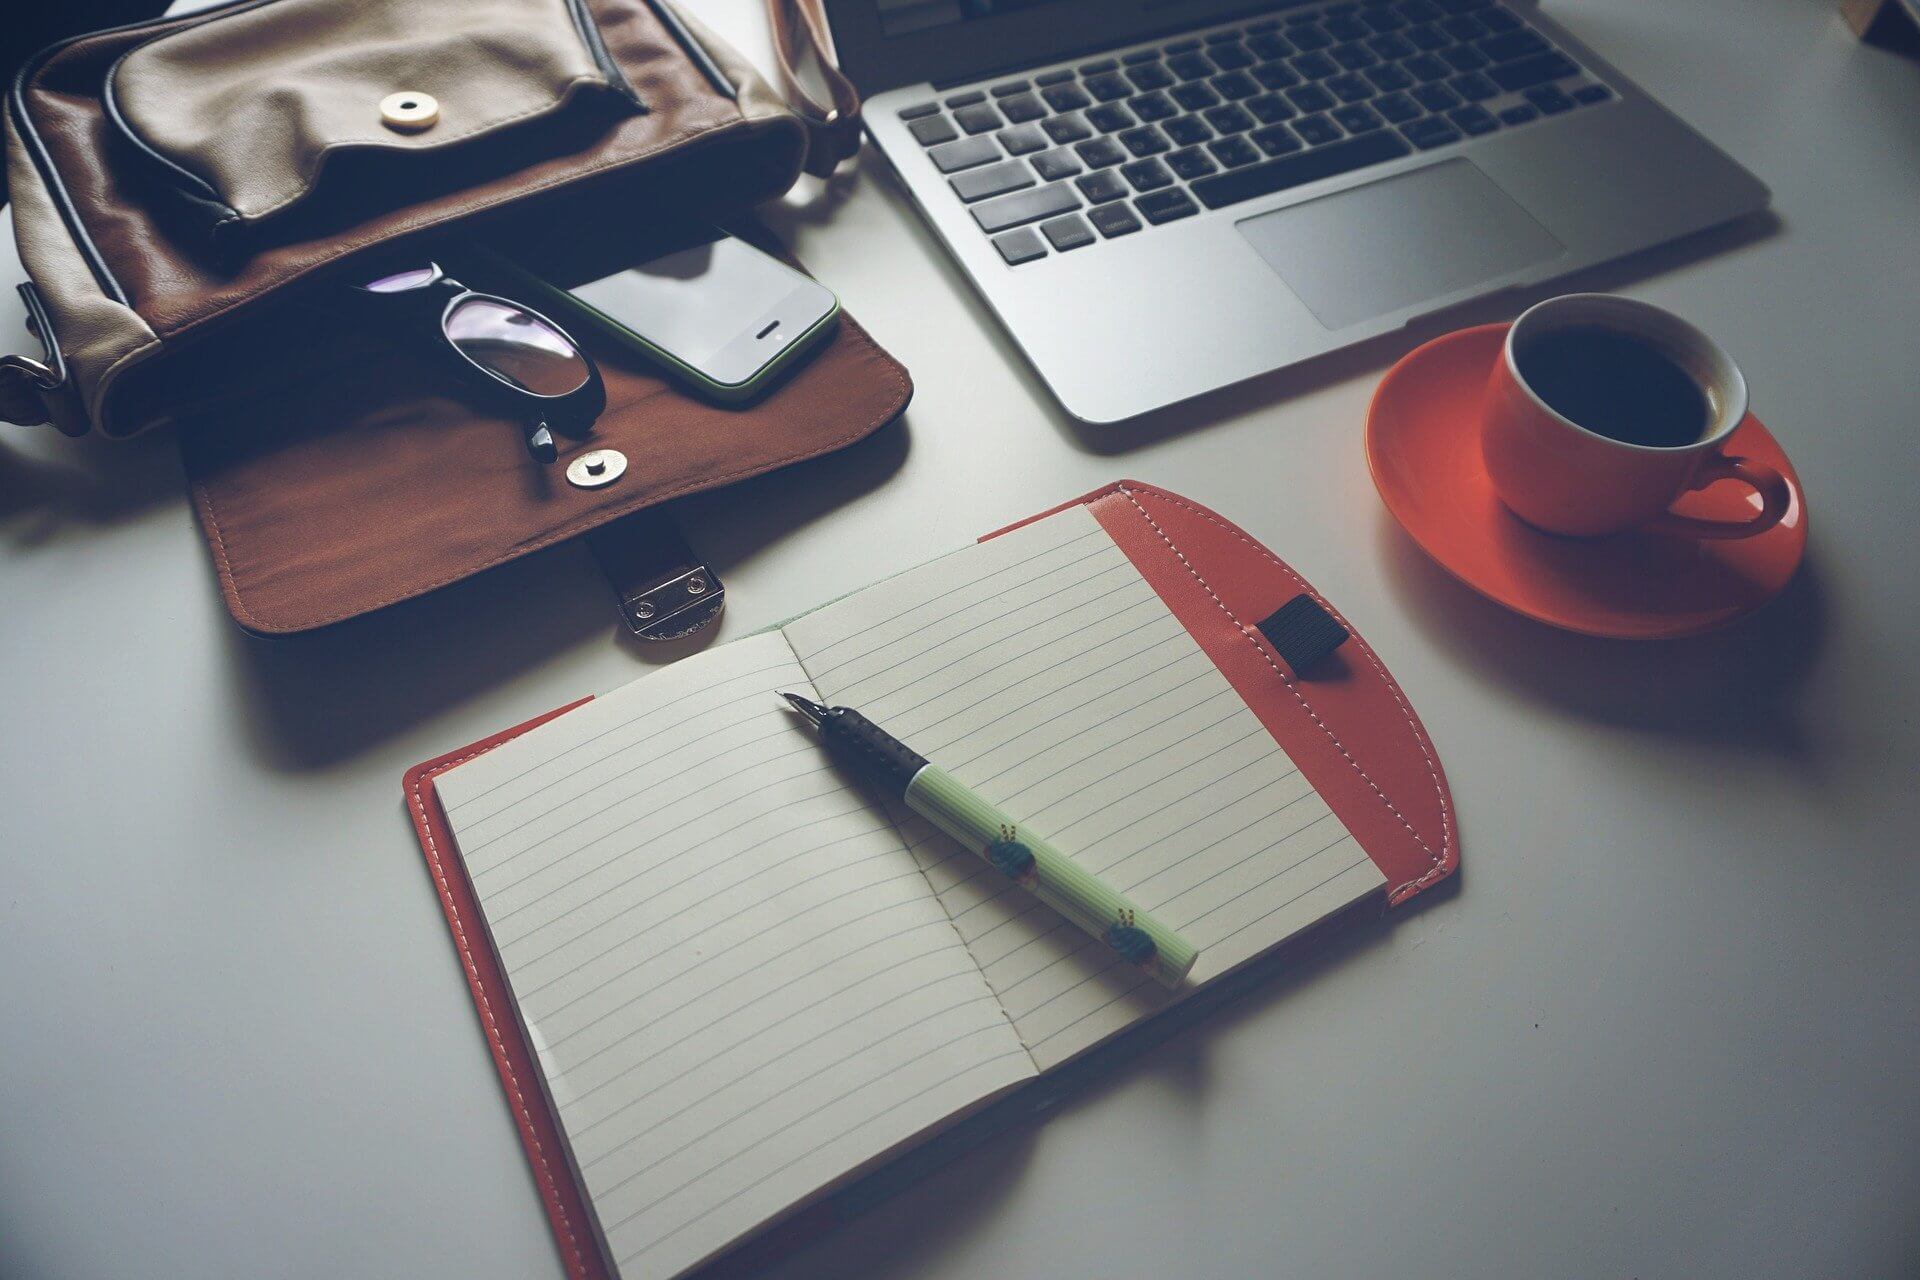 A notebook, a phone, and a cup of coffee on a desk.